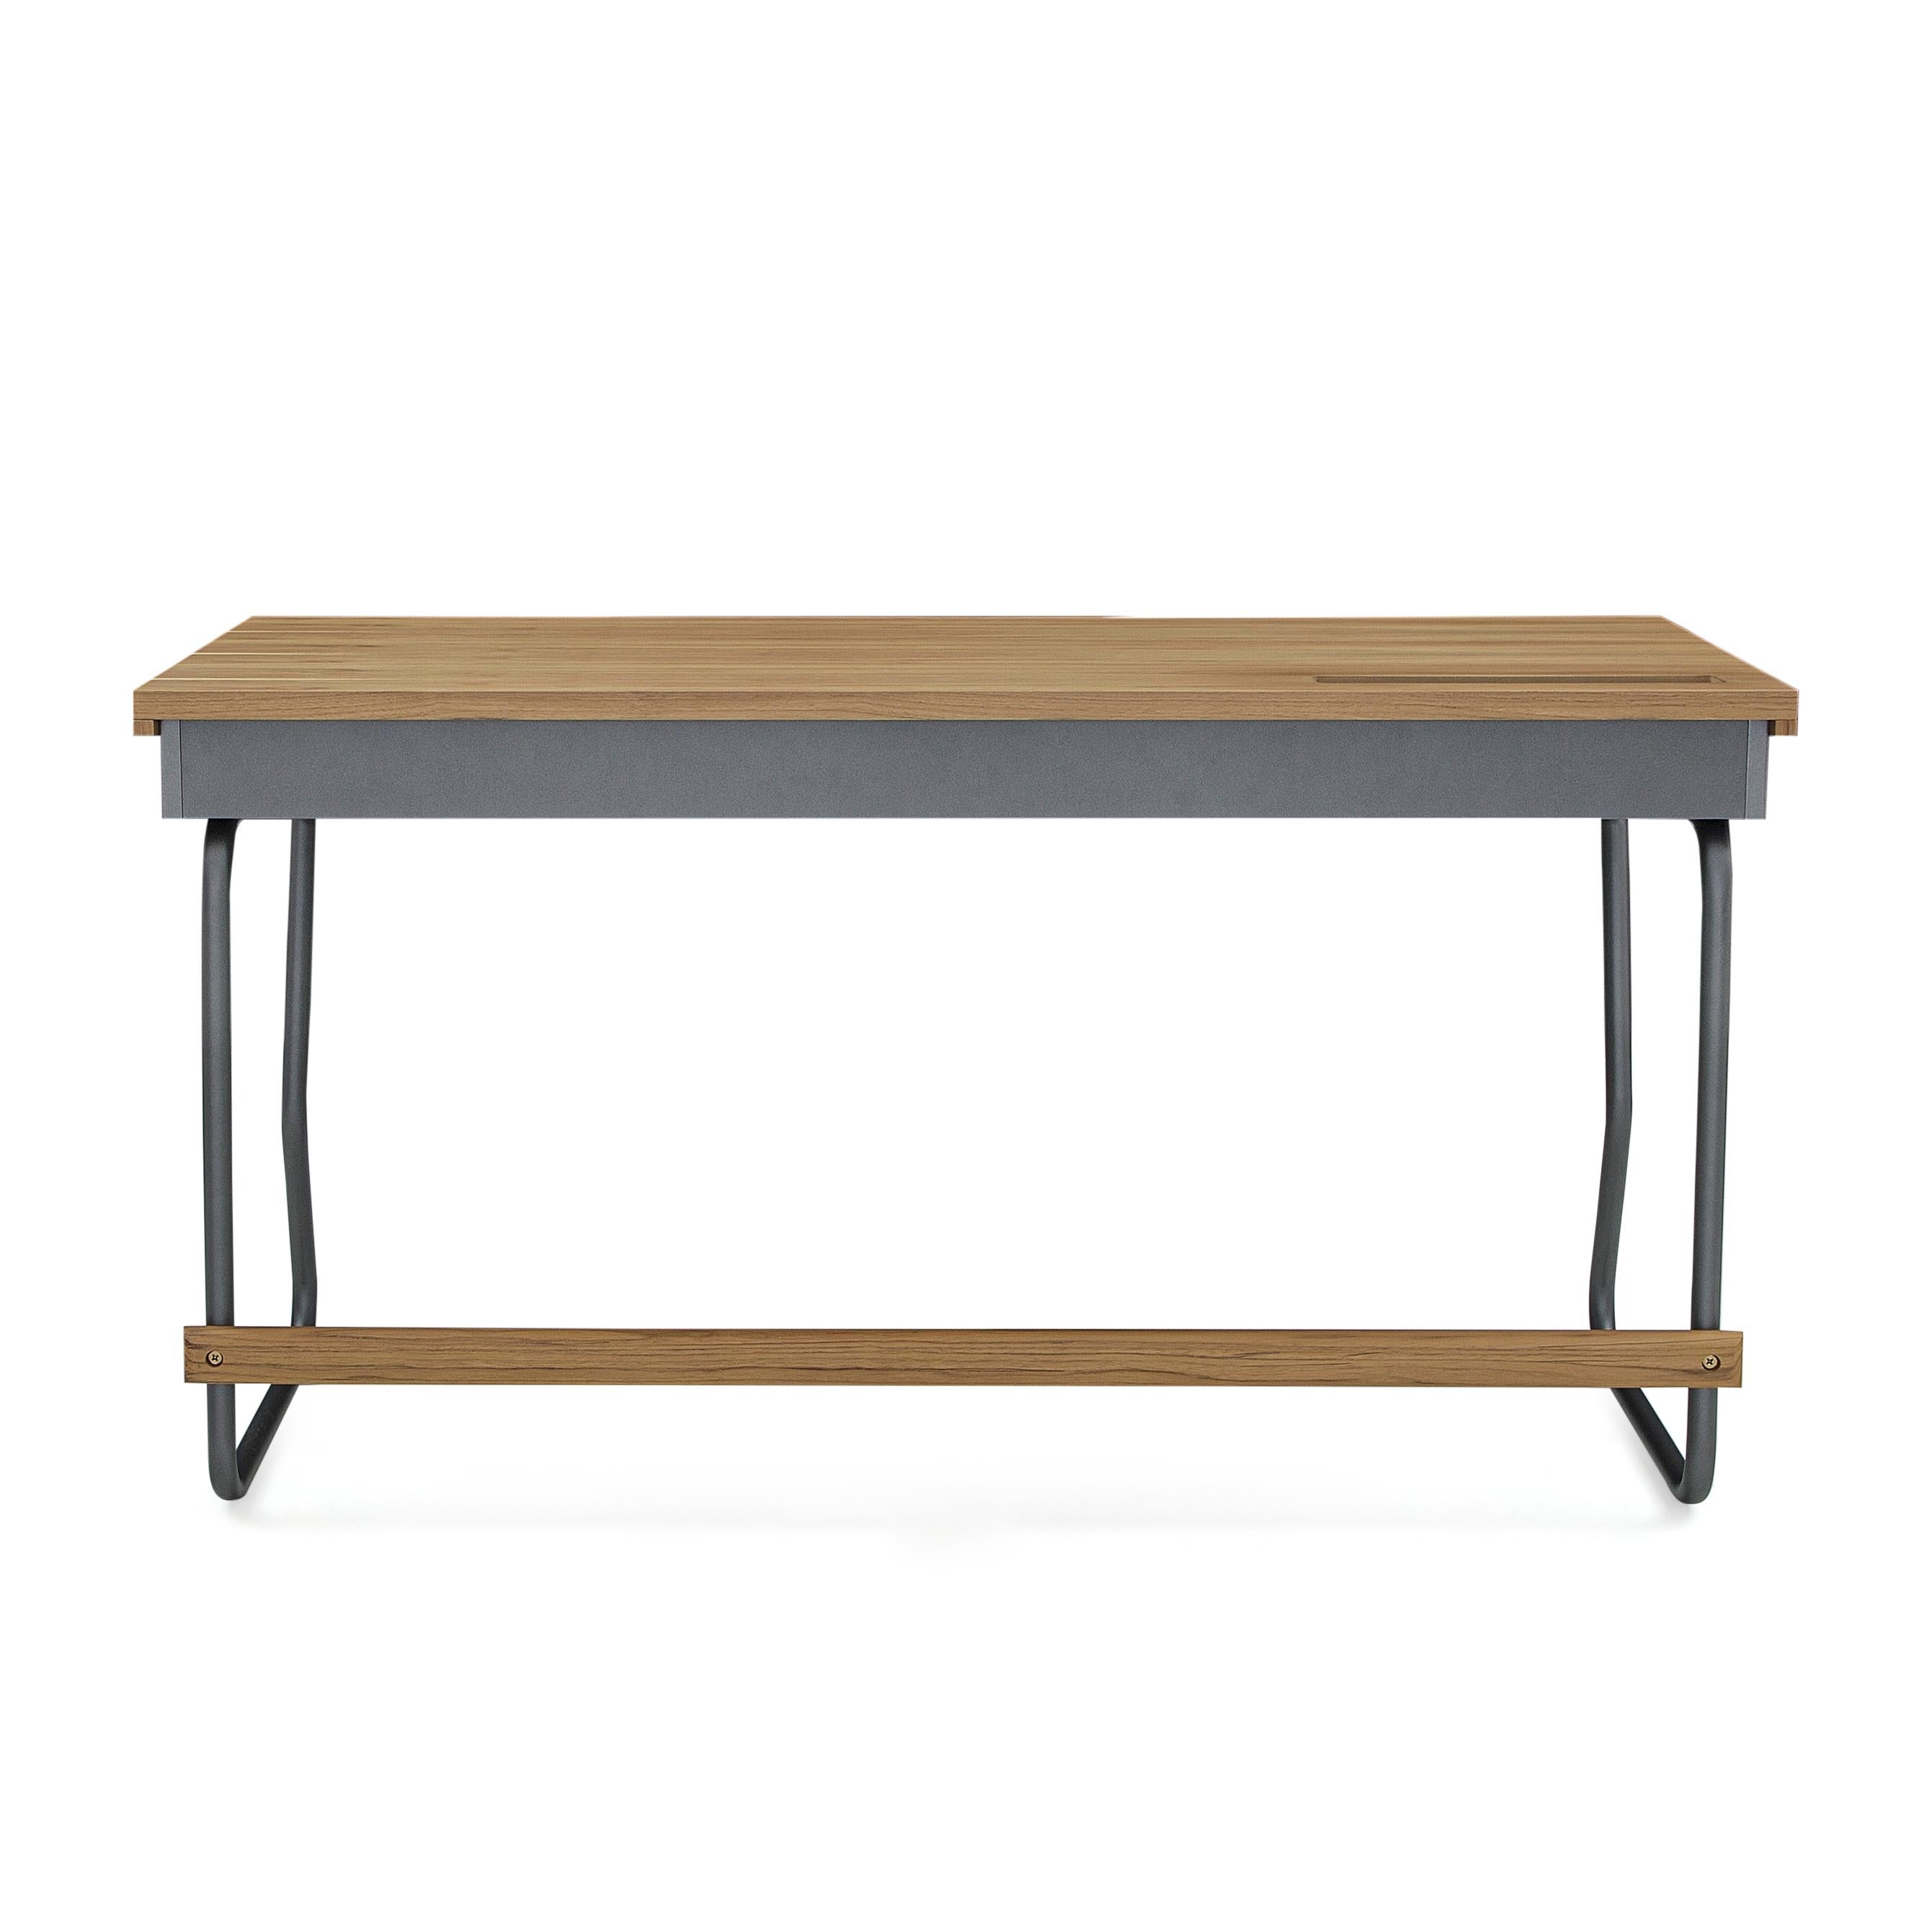 The Class desk was designed by our Uultis team with a teak wood finish top and a graphite-finished metal base, representing lightness and practicality in a product with a modern contemporary design. The mixing of metal and natural wood provides a